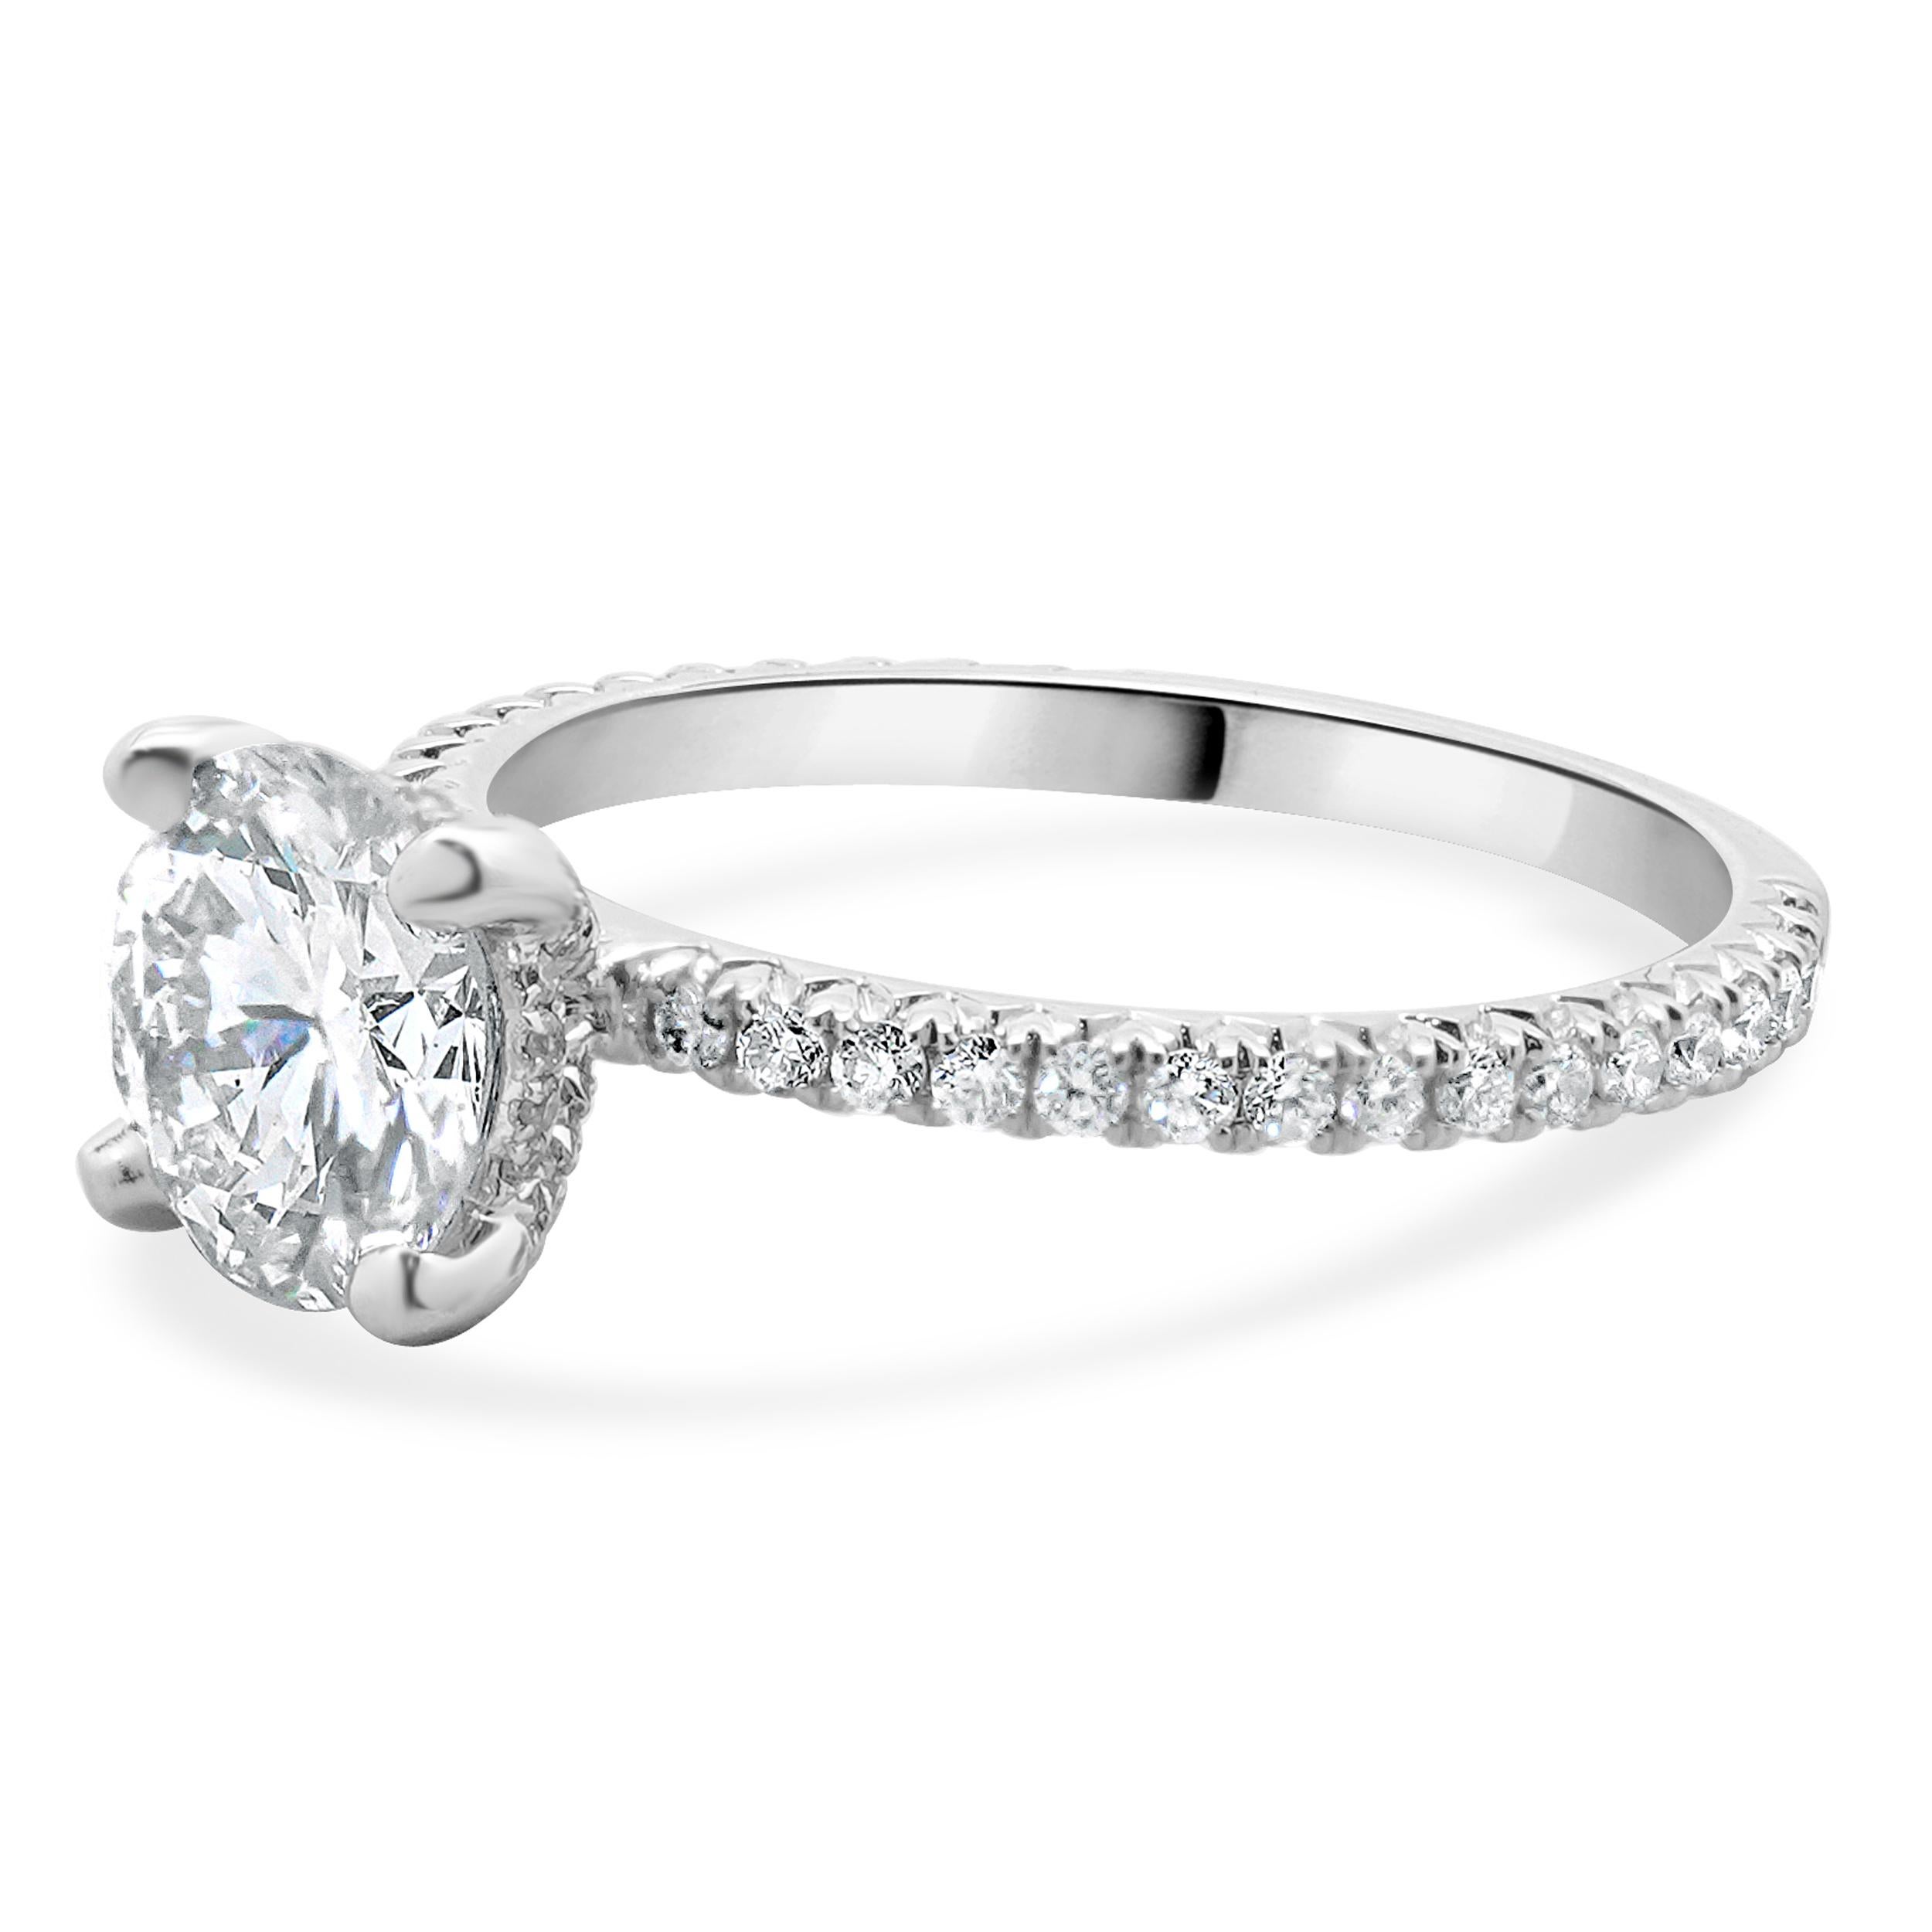 Designer: custom
Material: 14K white gold
Diamond: 1 round brilliant cut = 1.50ct
Color: J
Clarity: I1
Diamond: round brilliant = 0.41cttw
Color: G
Clarity: SI1
Ring Size: 6.5 (complimentary sizing available)
Weight: 2.53 grams
